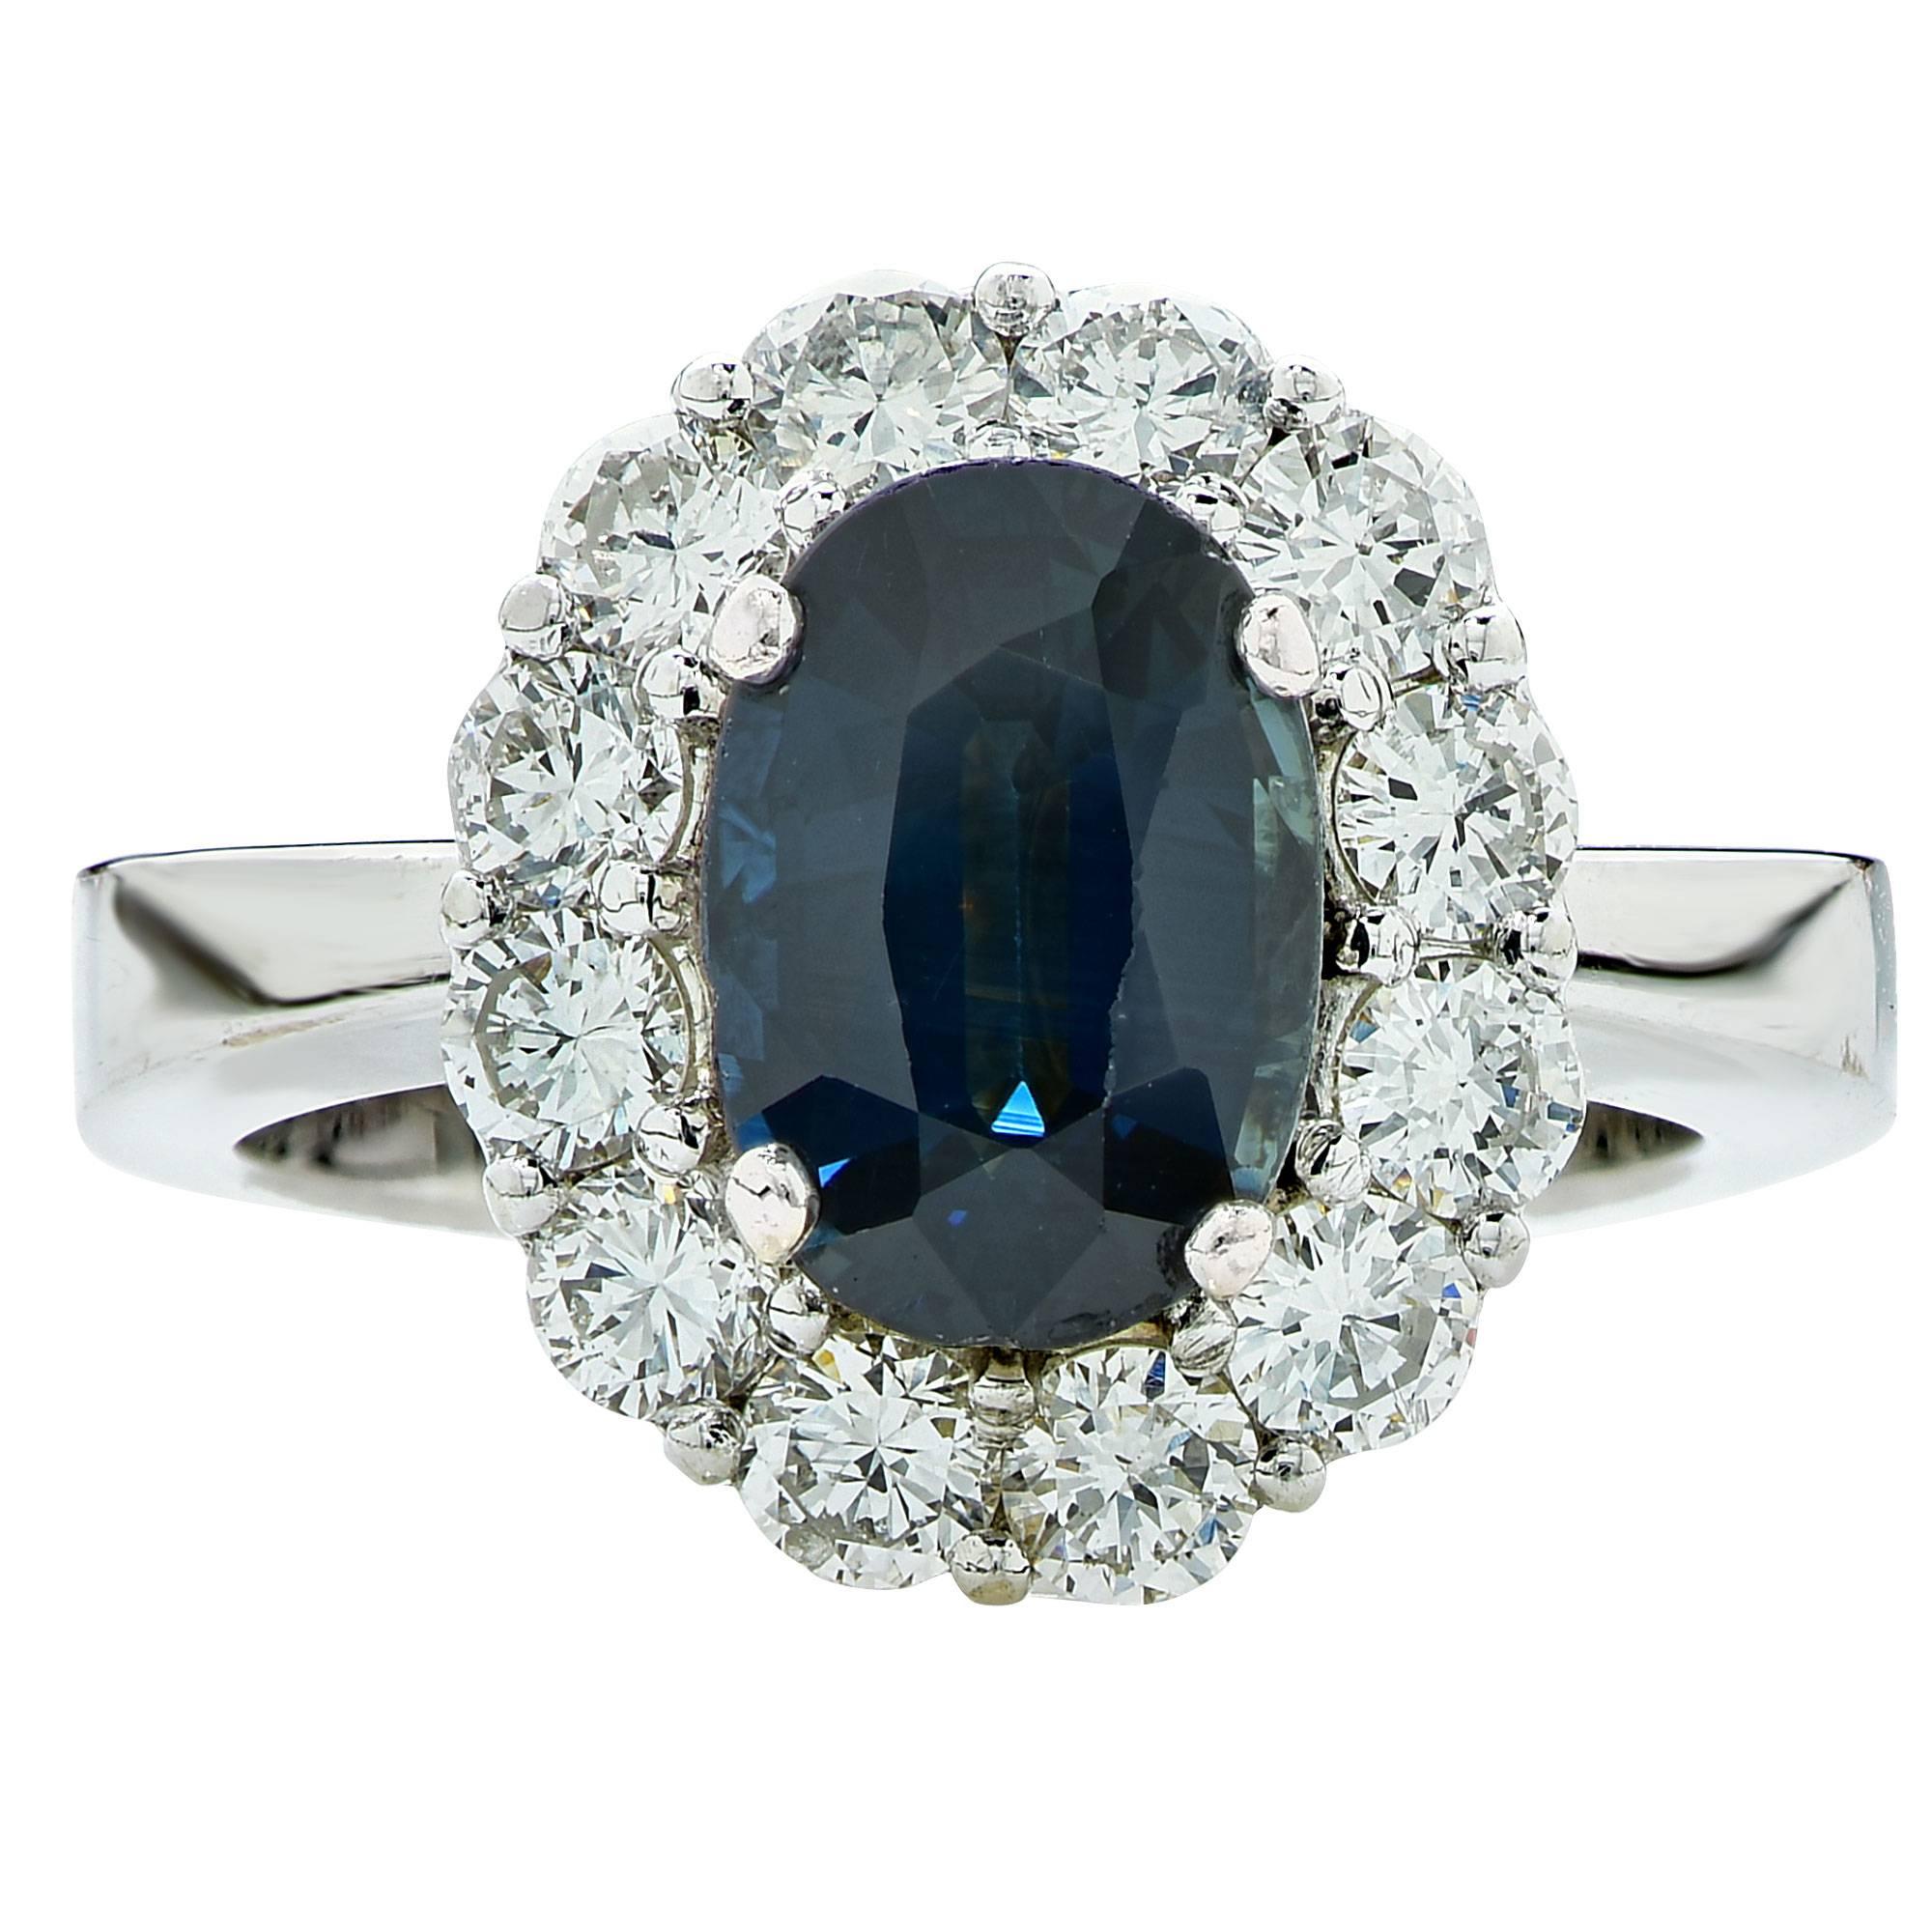 Platinum ring featuring an oval cut Sapphire weighing approximately 1.50cts accented by 12 round brilliant cut diamonds weighing approximately 1.20cts total, G color VS clarity.

The ring is a size 5 and can be sized up or down.
It is stamped and